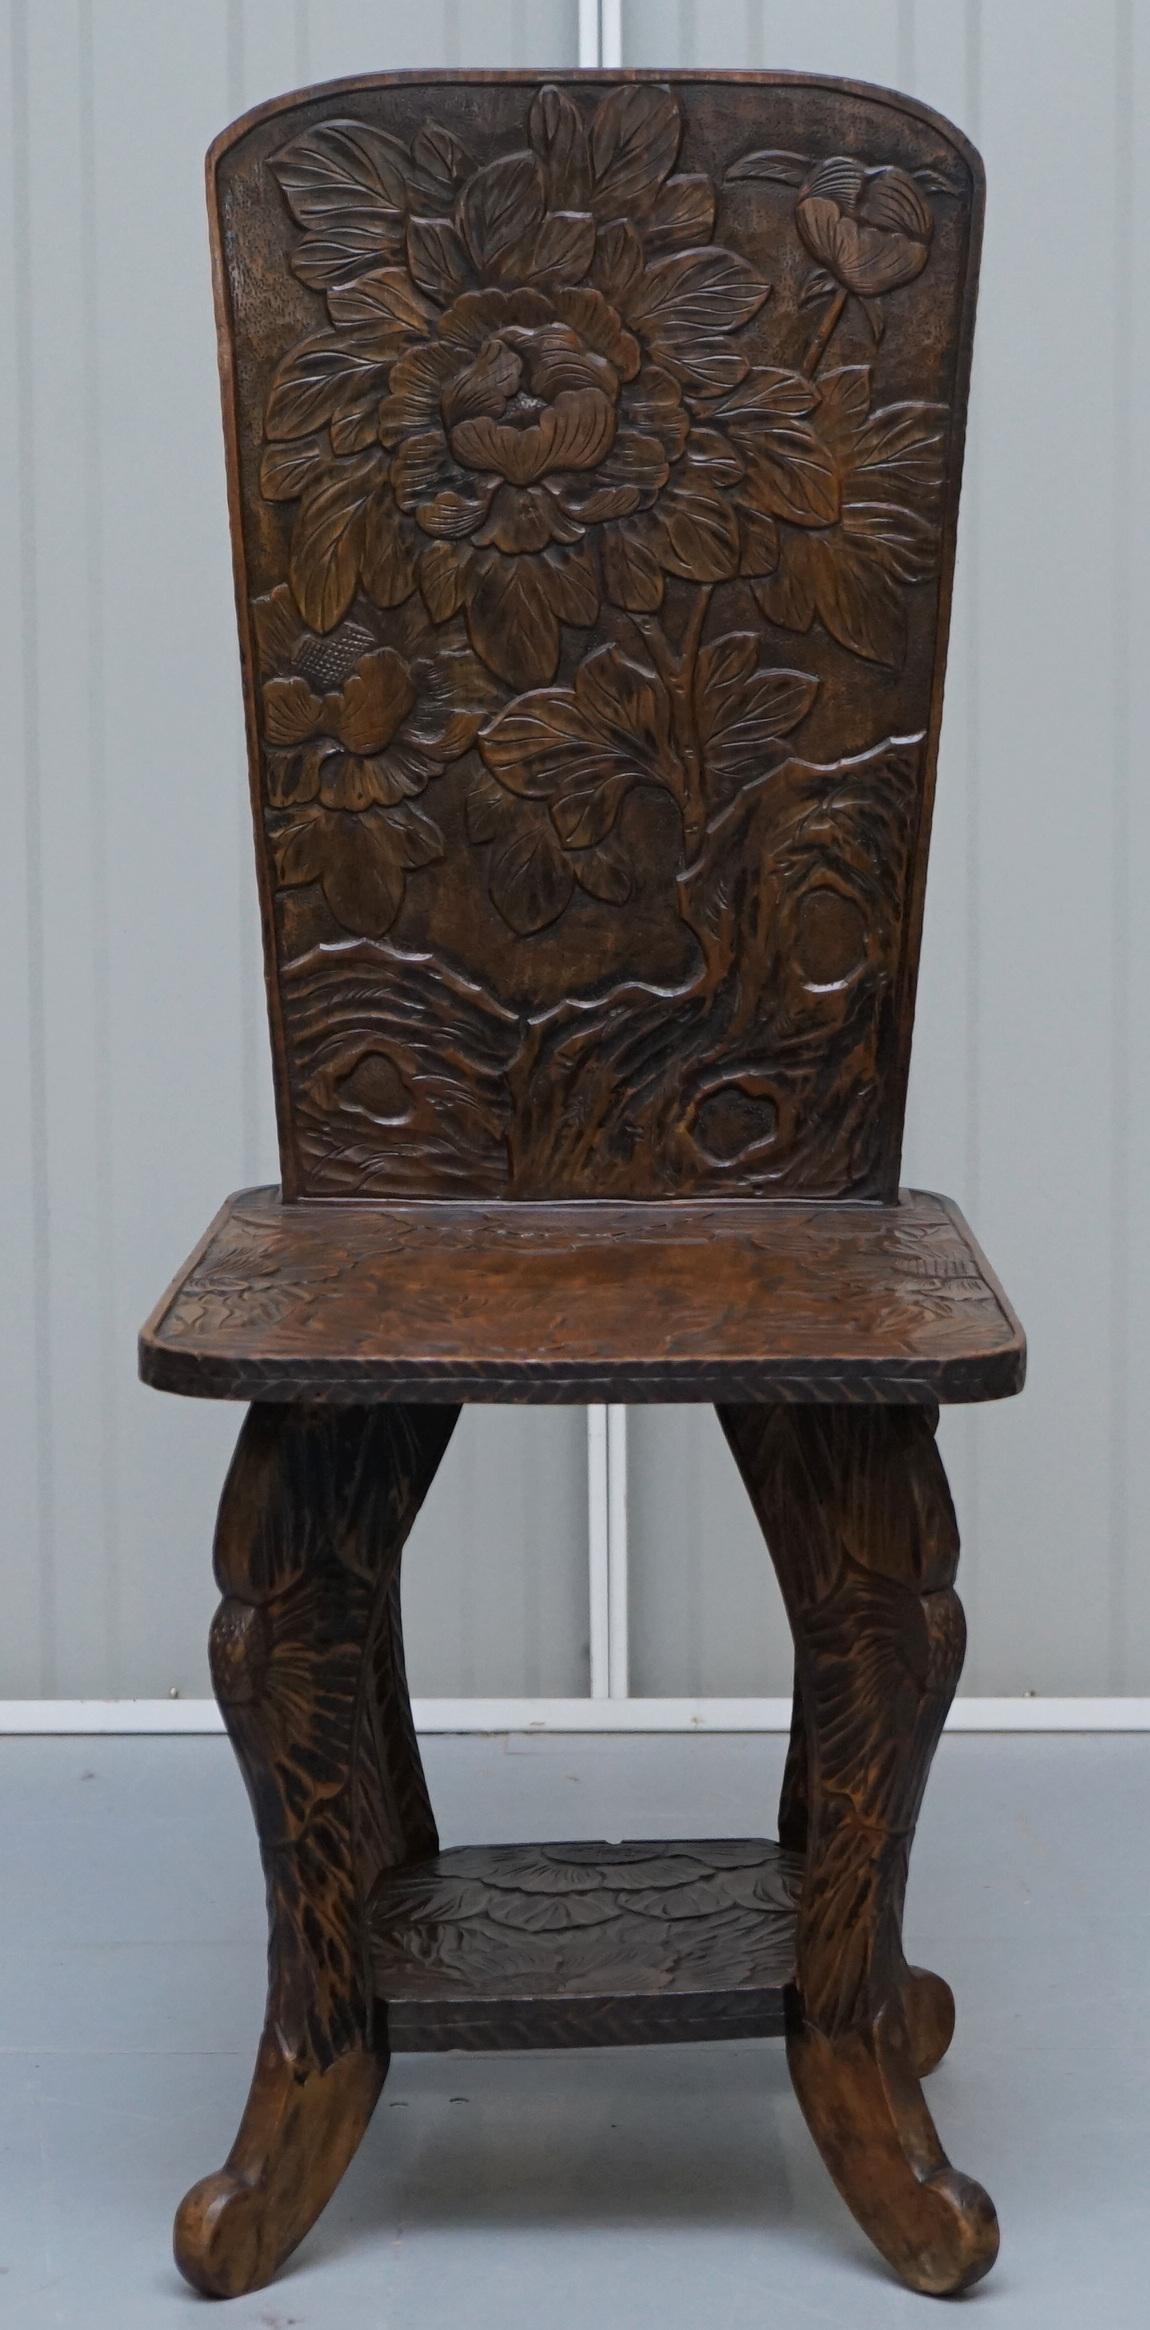 We are delighted to this stunning and exceptionally rare original Liberty’s London signed Qing dynasty chair

I have never seen one of these chairs before, I have bought quite a few of the side tables and actually have 2-3 listed for sale under my